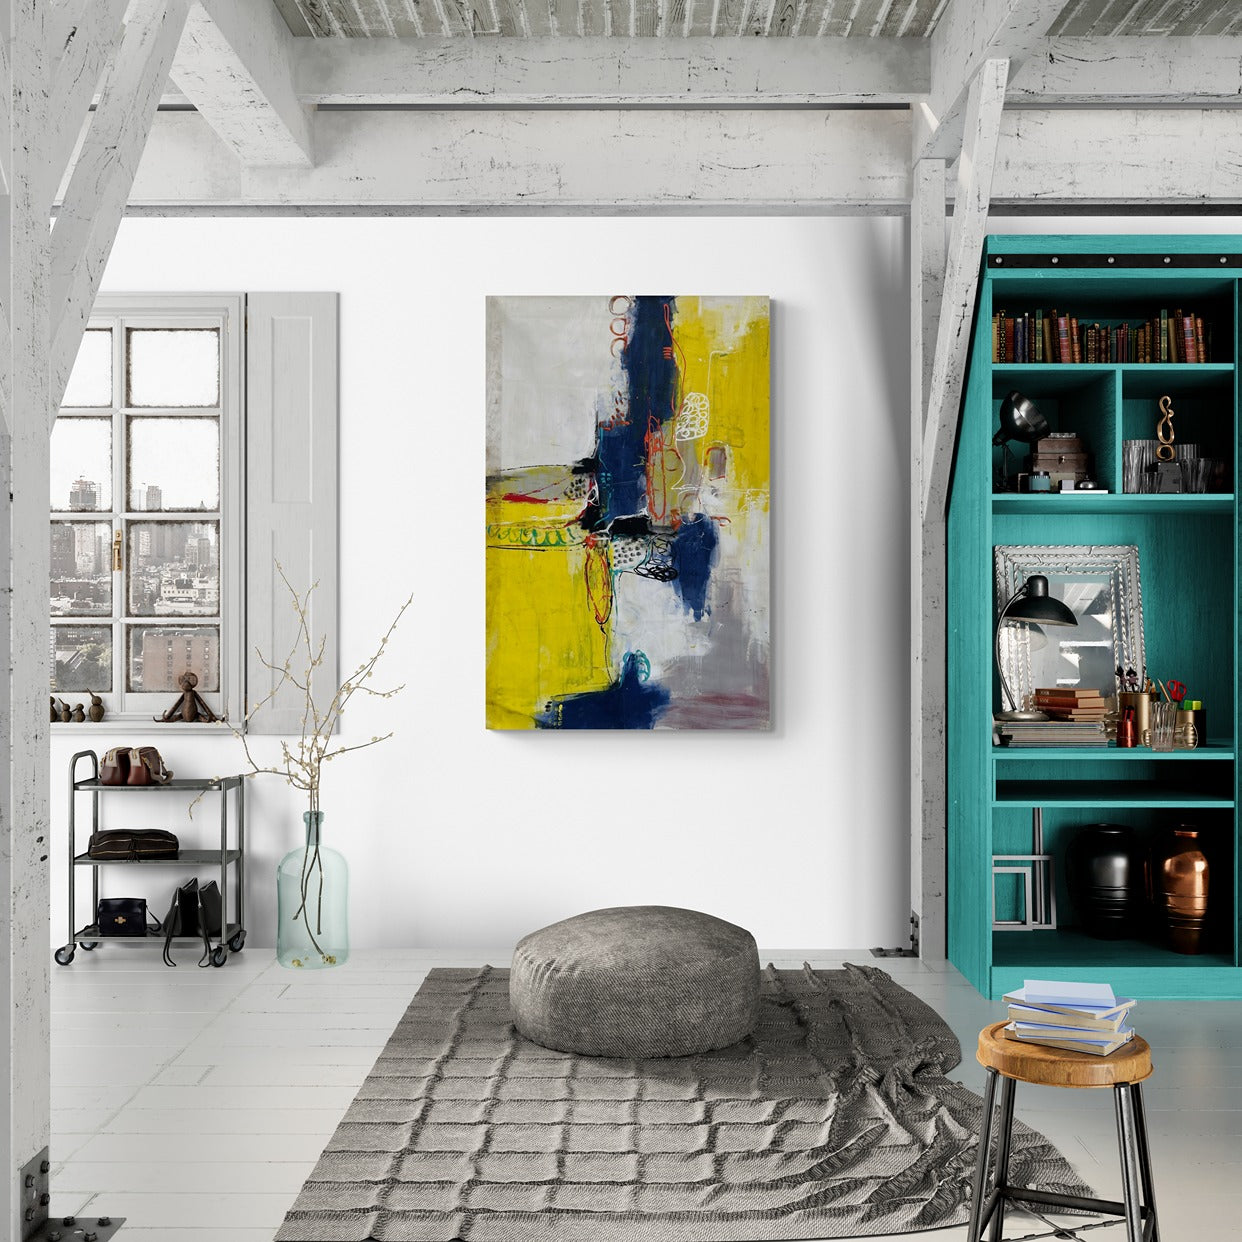 Expansive rustic loft living room adorned with a striking original hand-painted abstract canvas wall art piece, adding artistic flair to the décor.